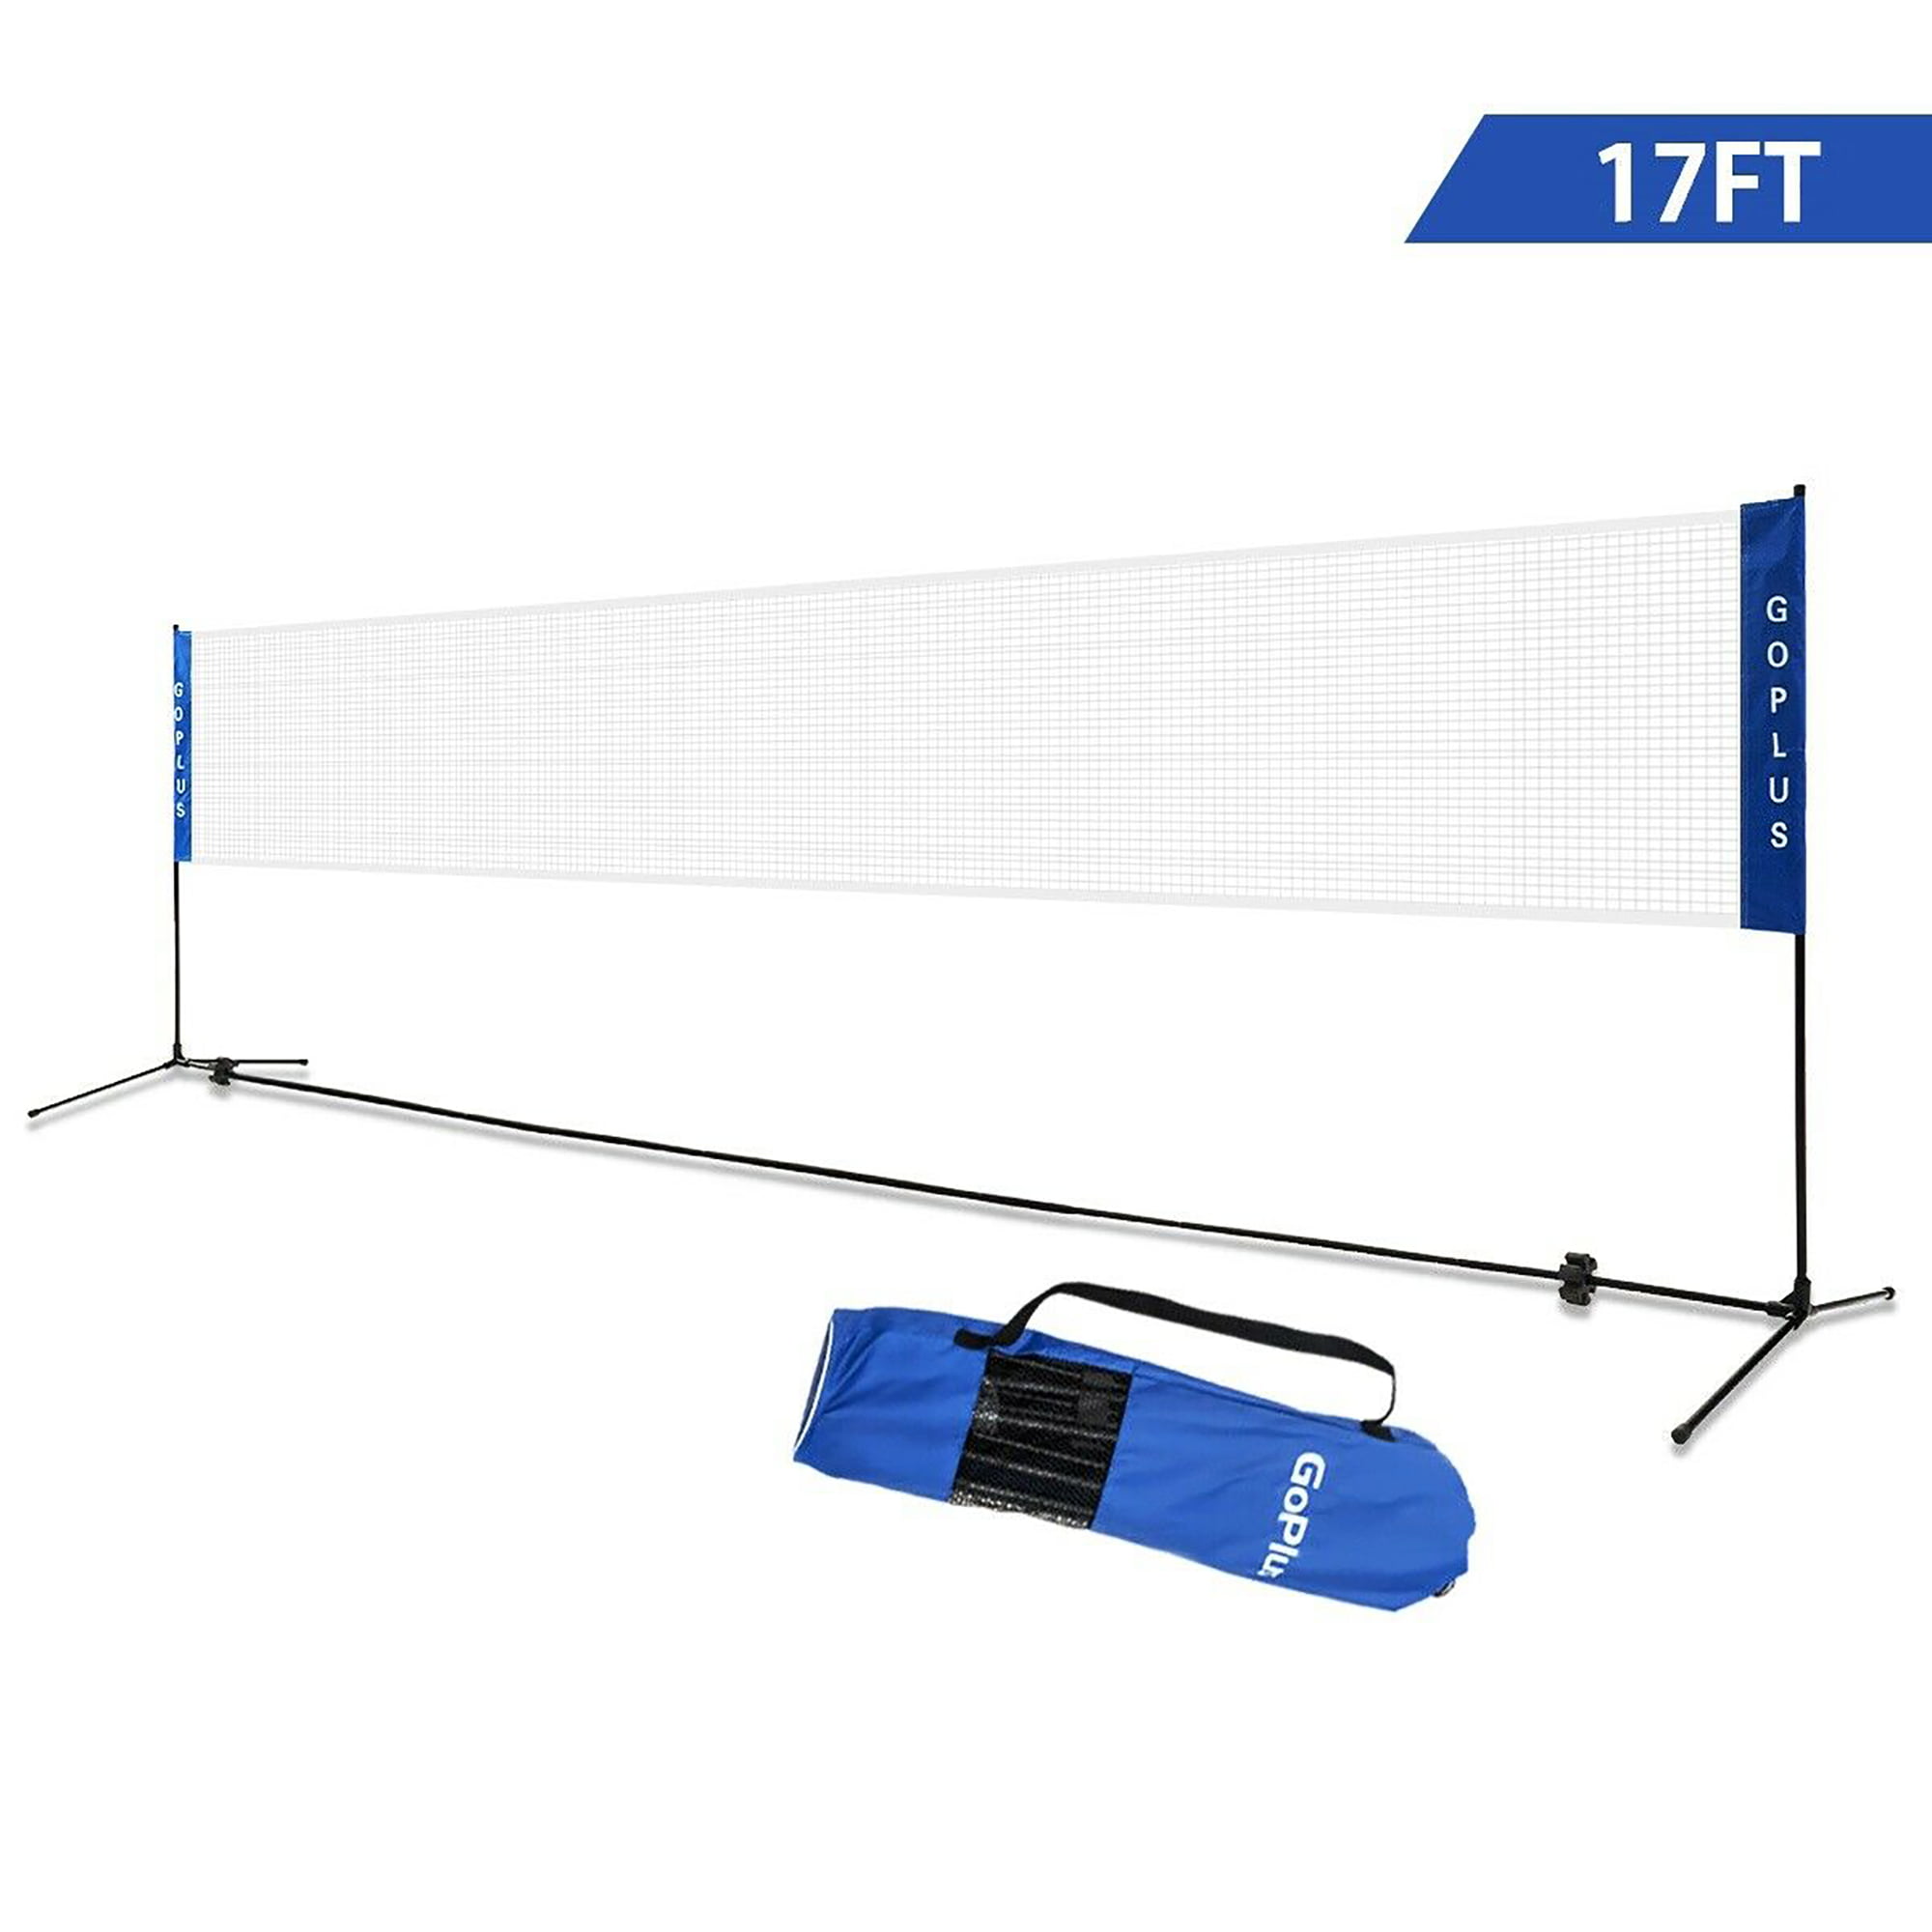 US 20FT Portable Beach Badminton Volleyball Tennis Net Kit W/ Stand Carry Bag 